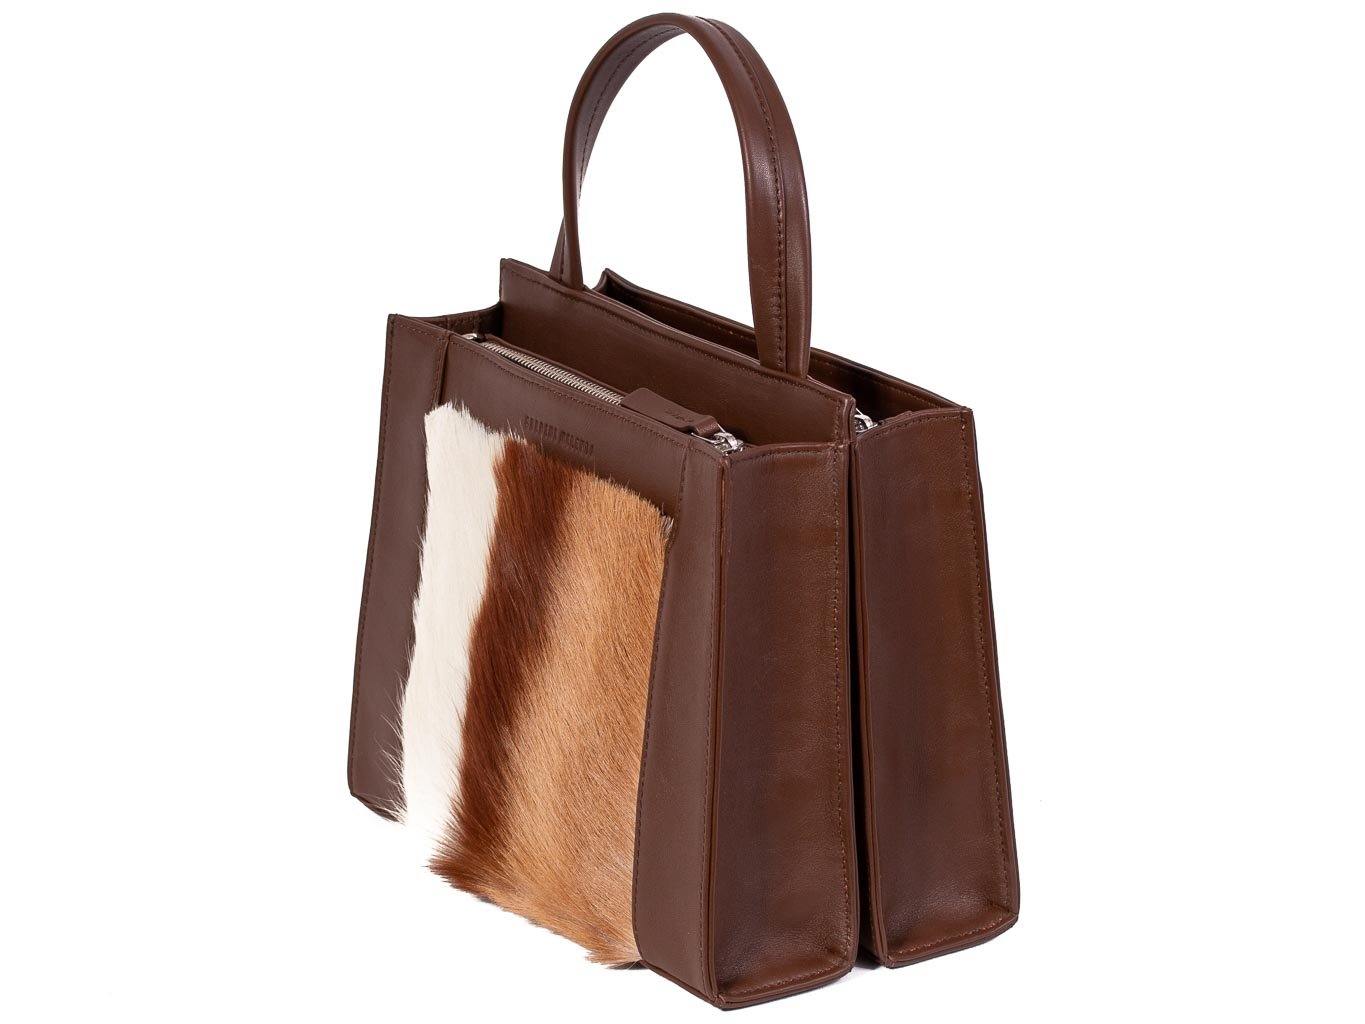 Top Handle Springbok Handbag in Cocoa Brown with a stripe feature by Sherene Melinda side angle